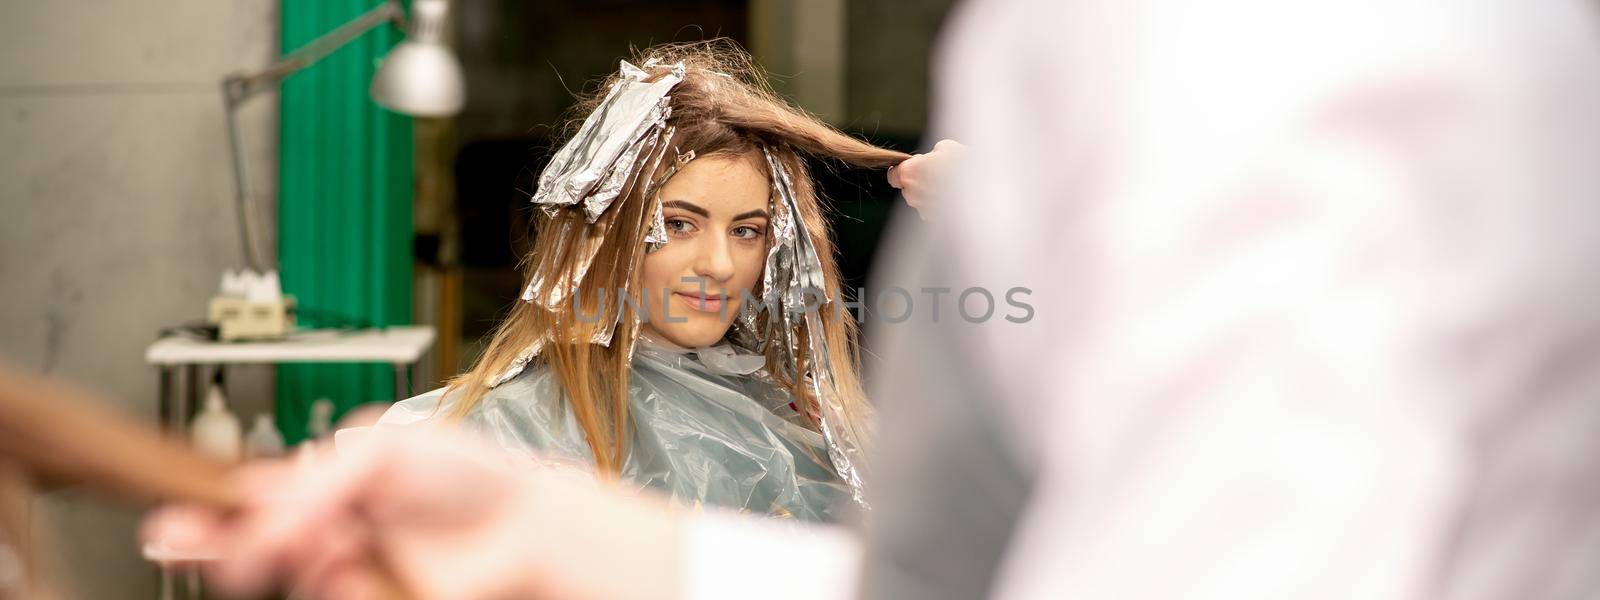 Portrait of a beautiful young caucasian woman who is smiling getting dyeing her hair with foil in a beauty salon